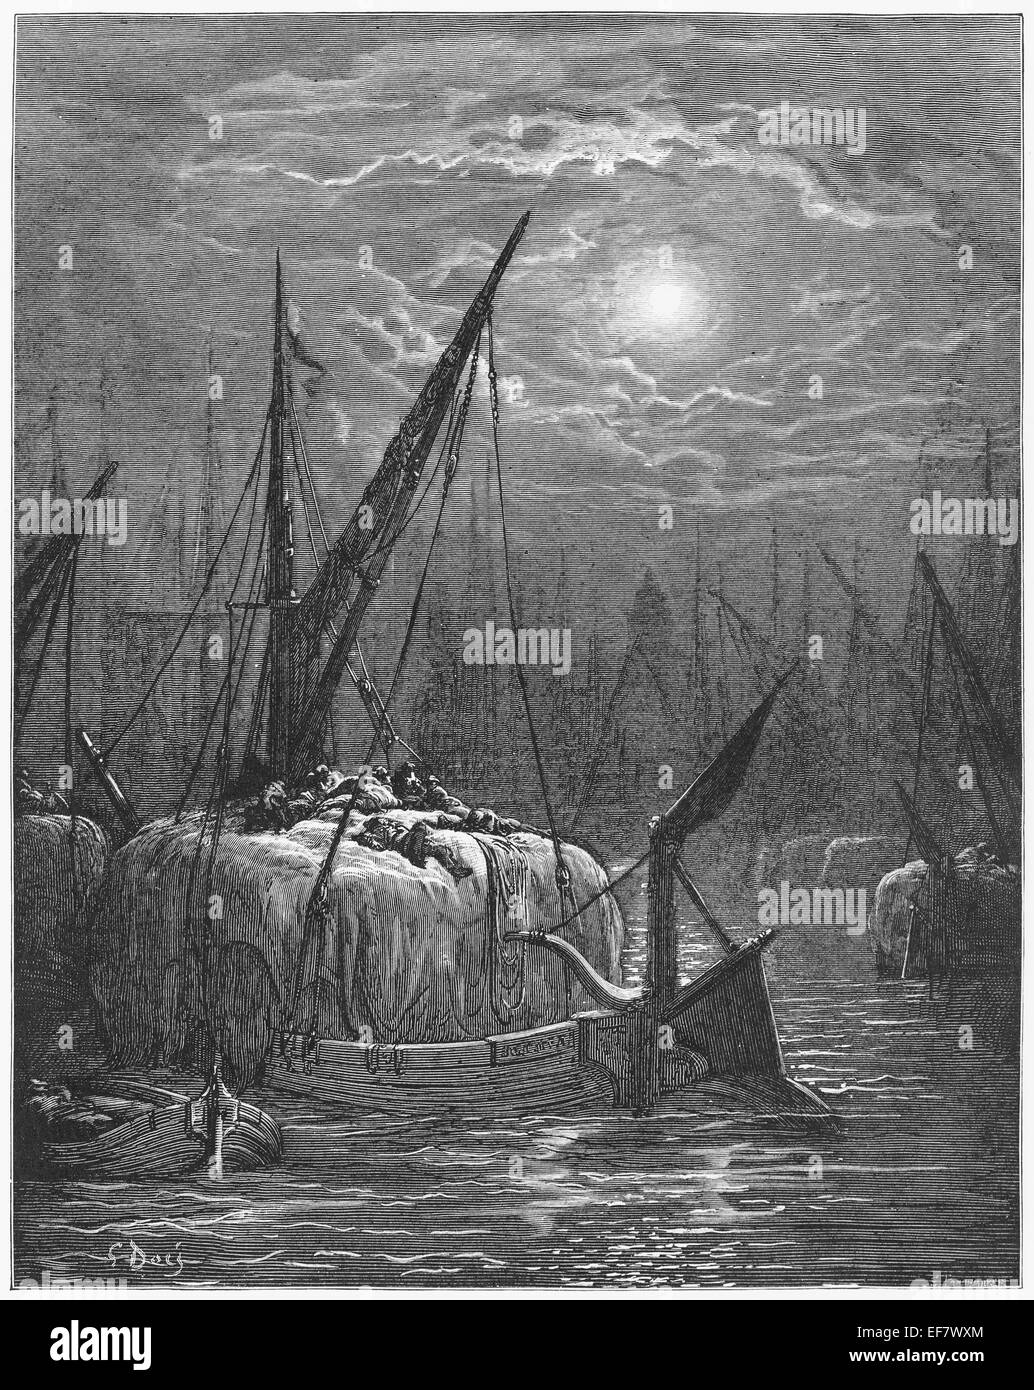 Hay boats on the Thames - Gustave Dore's London Stock Photo